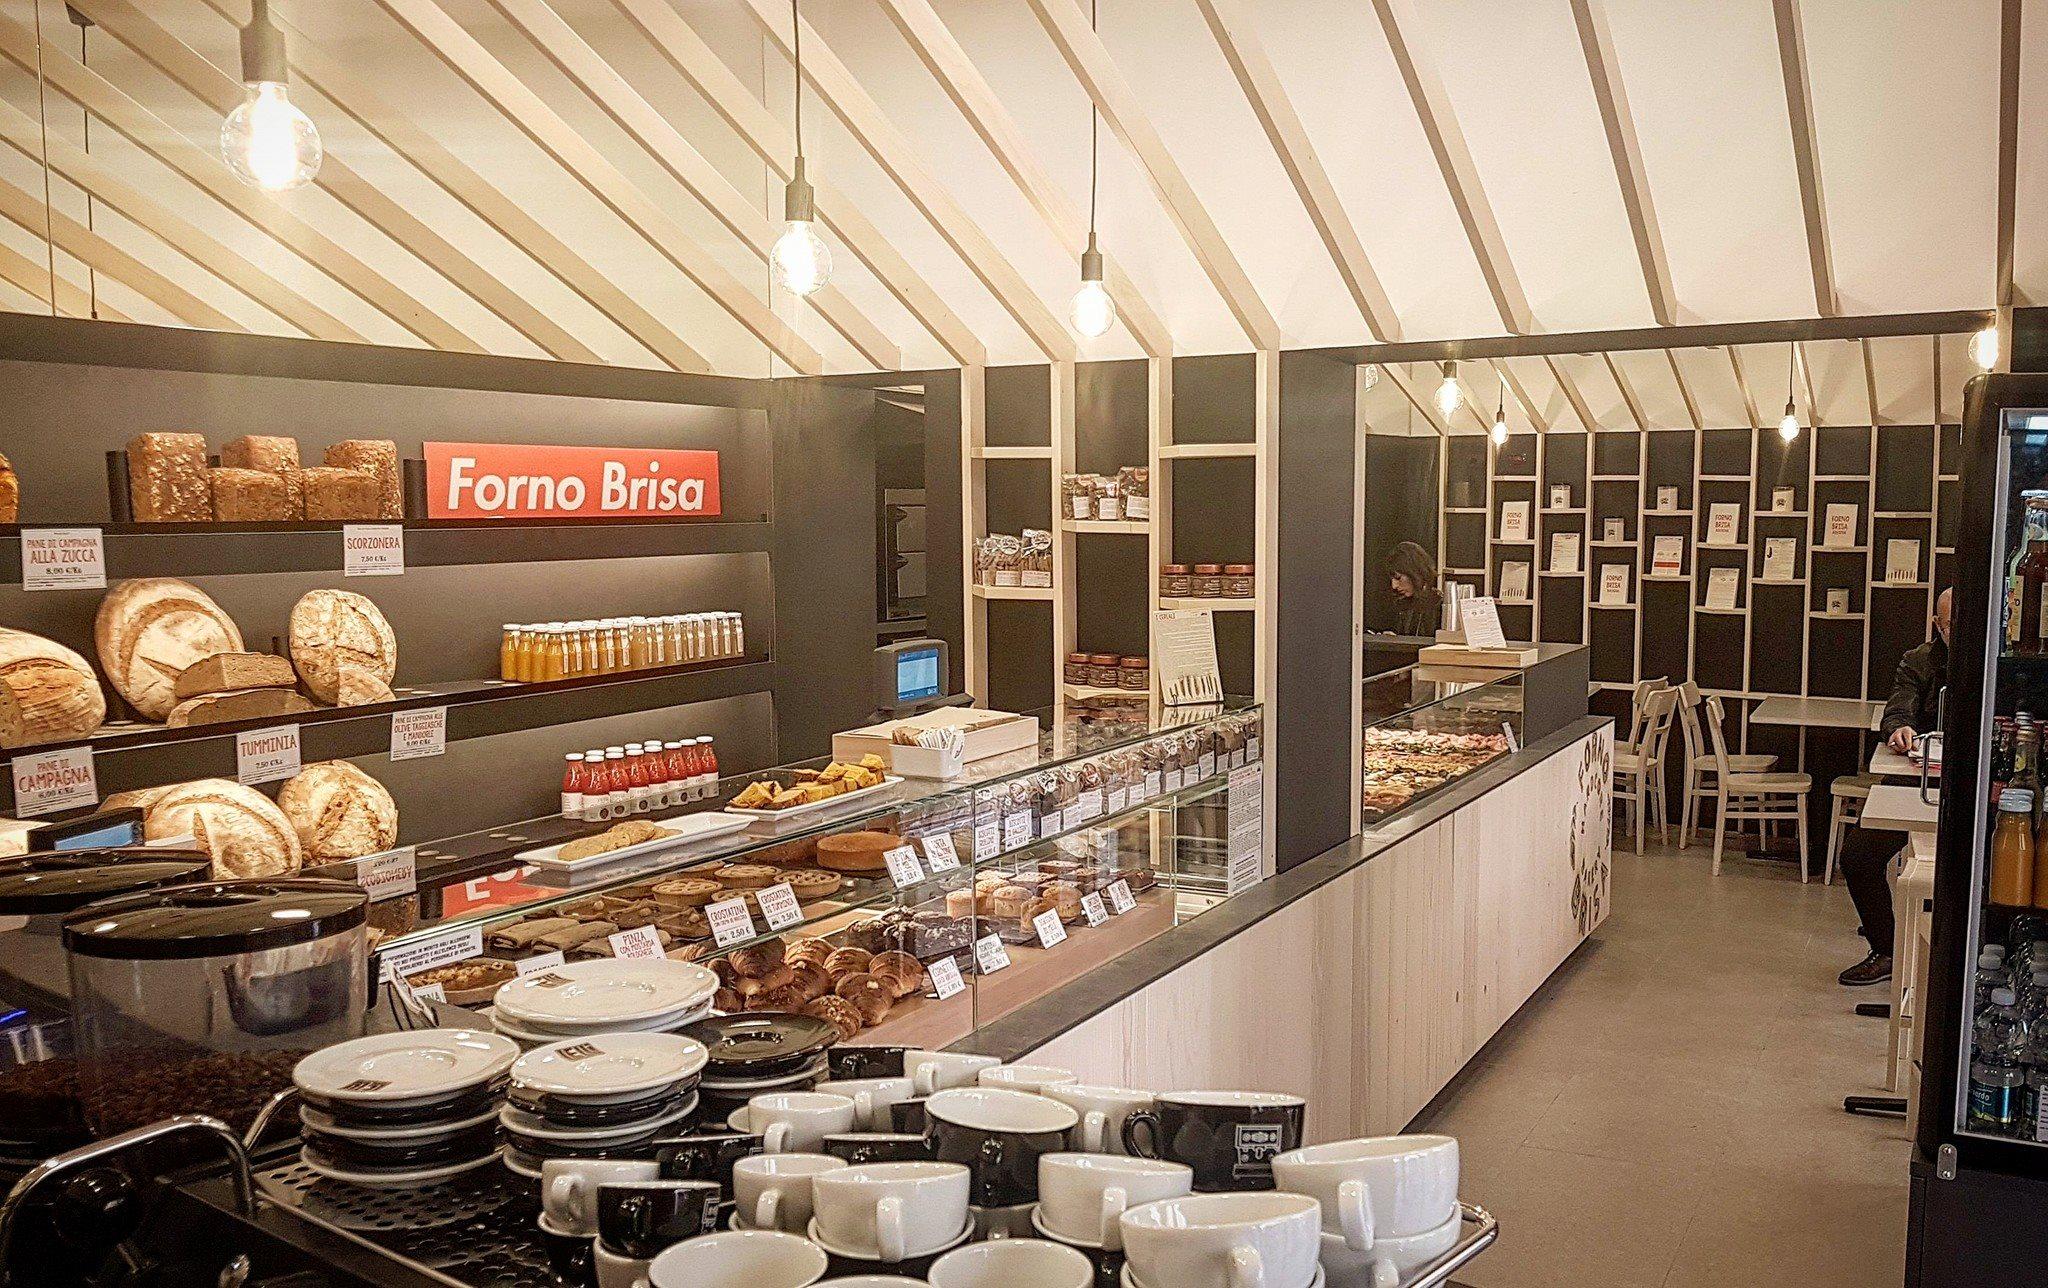 Cover image of this place Forno Brisa